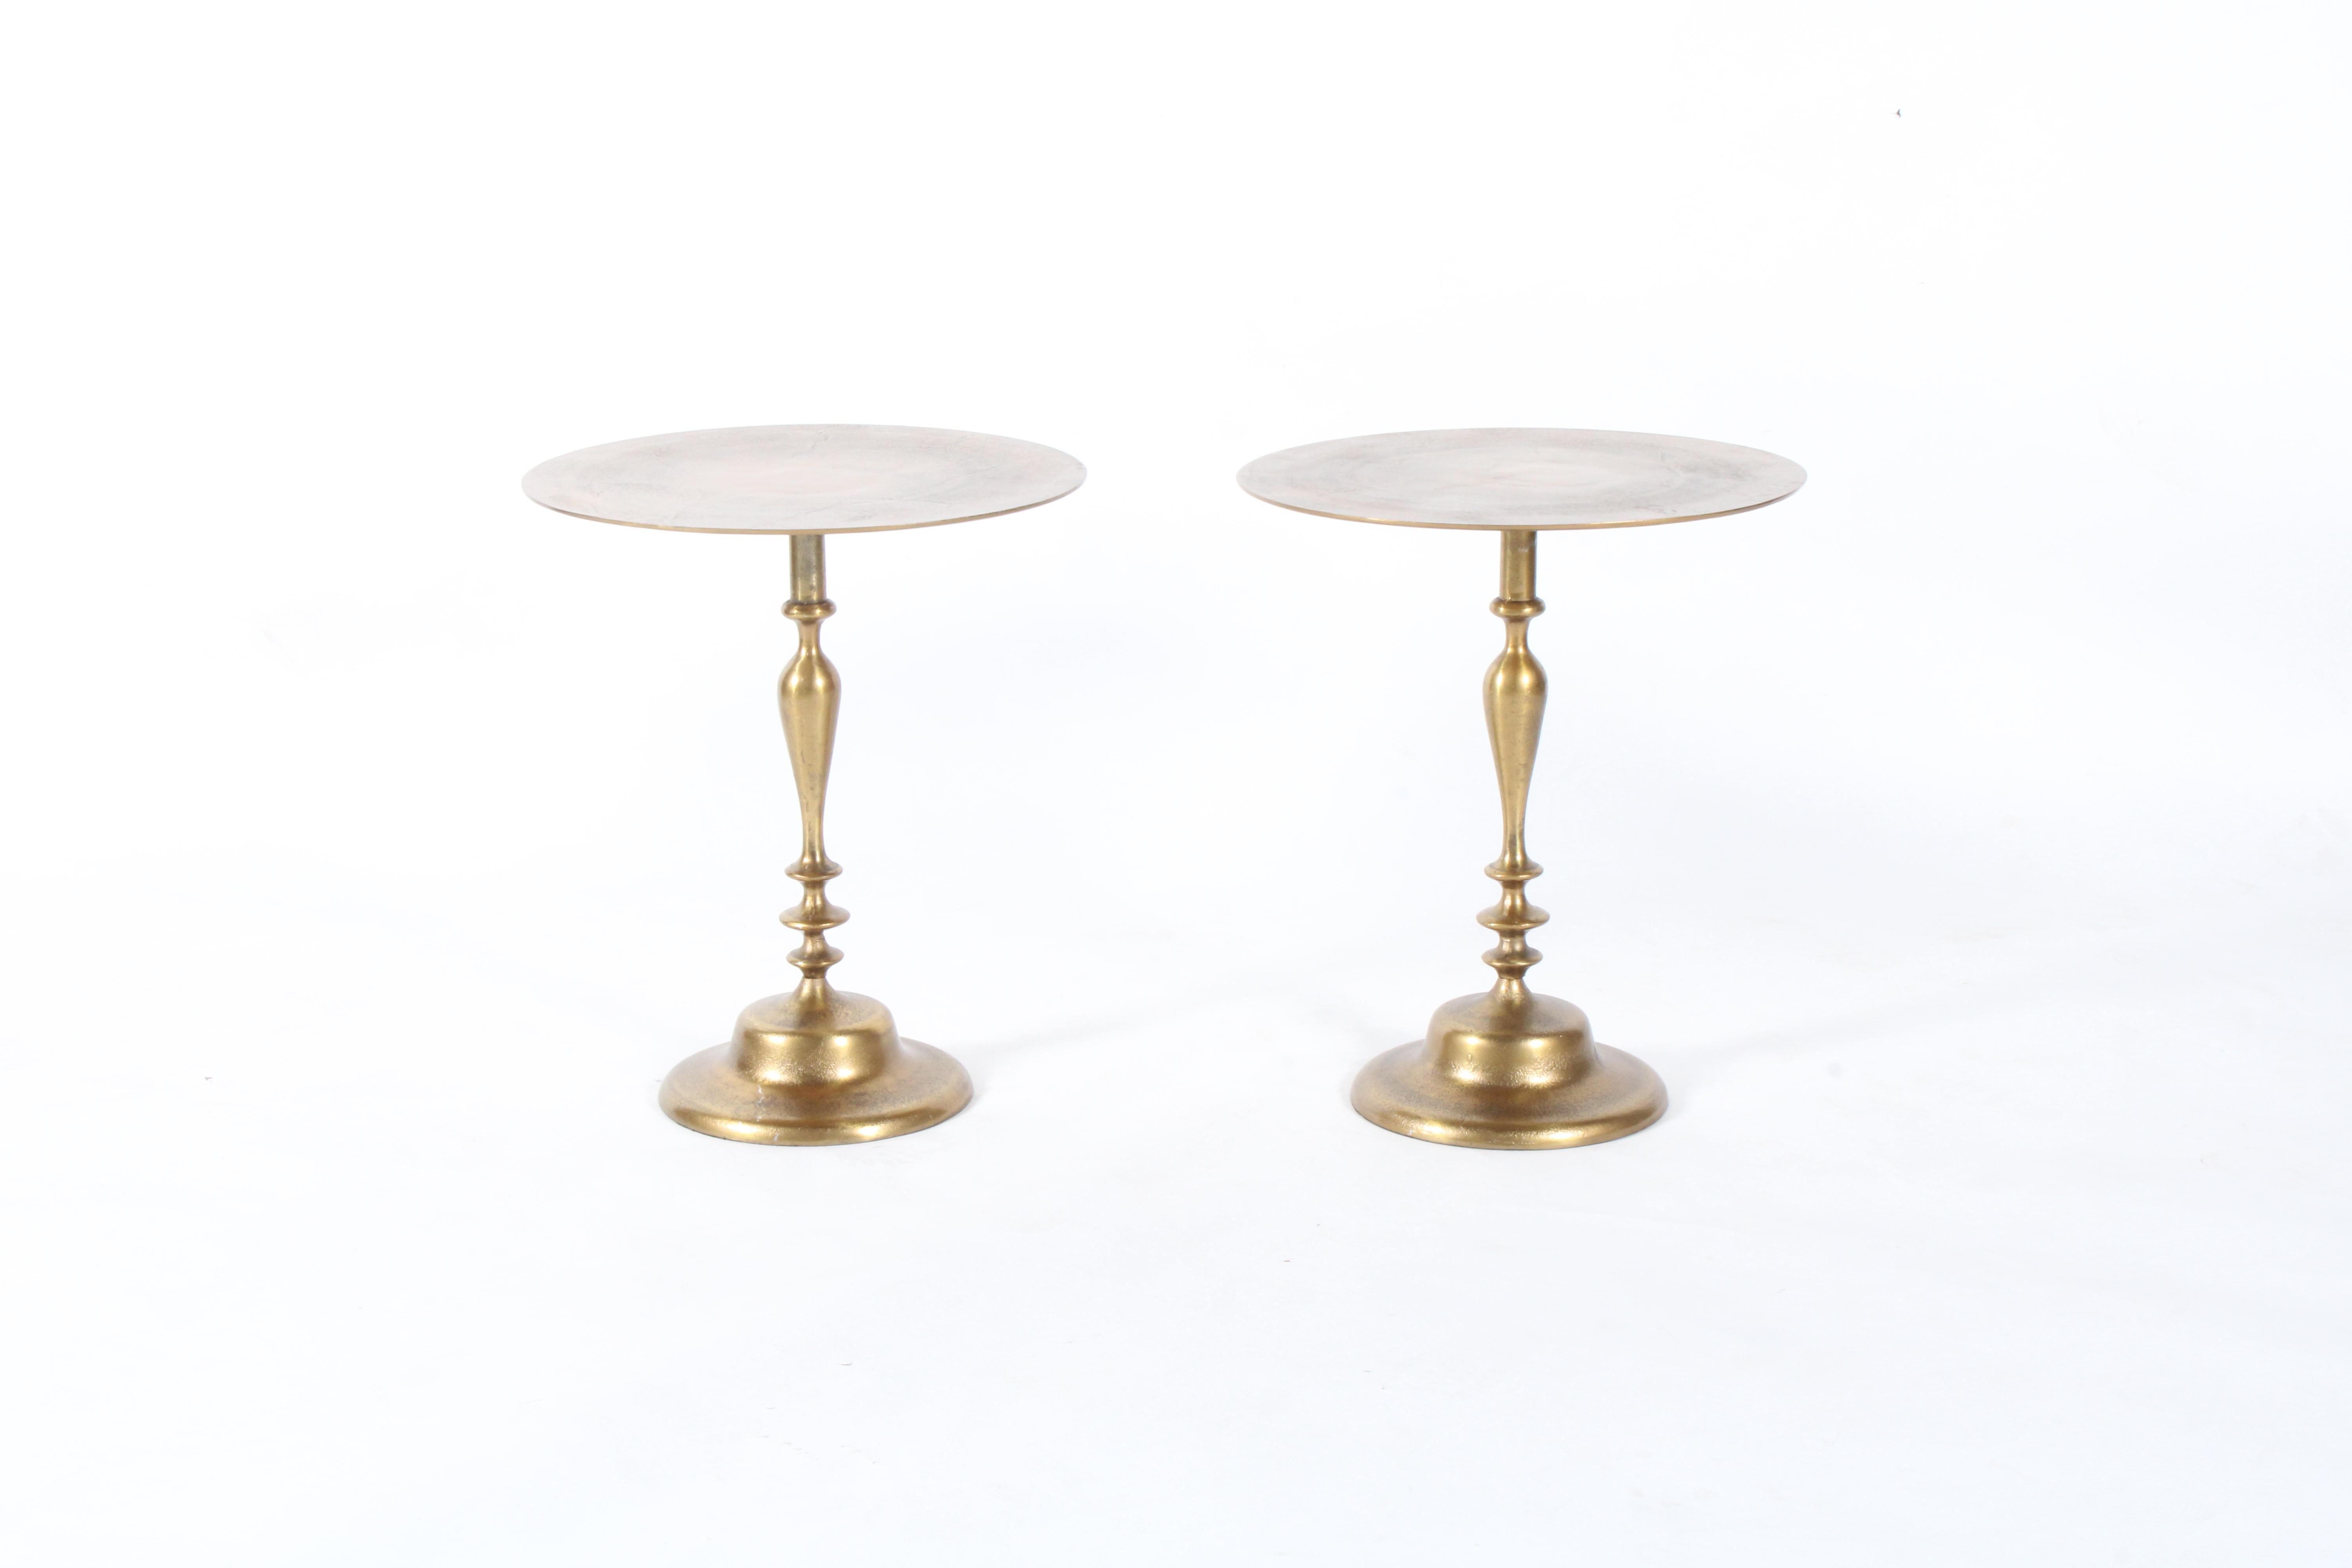 Italian Historic Side Tables From The Ritz Hotel Paris *Free Worldwide Delivery For Sale